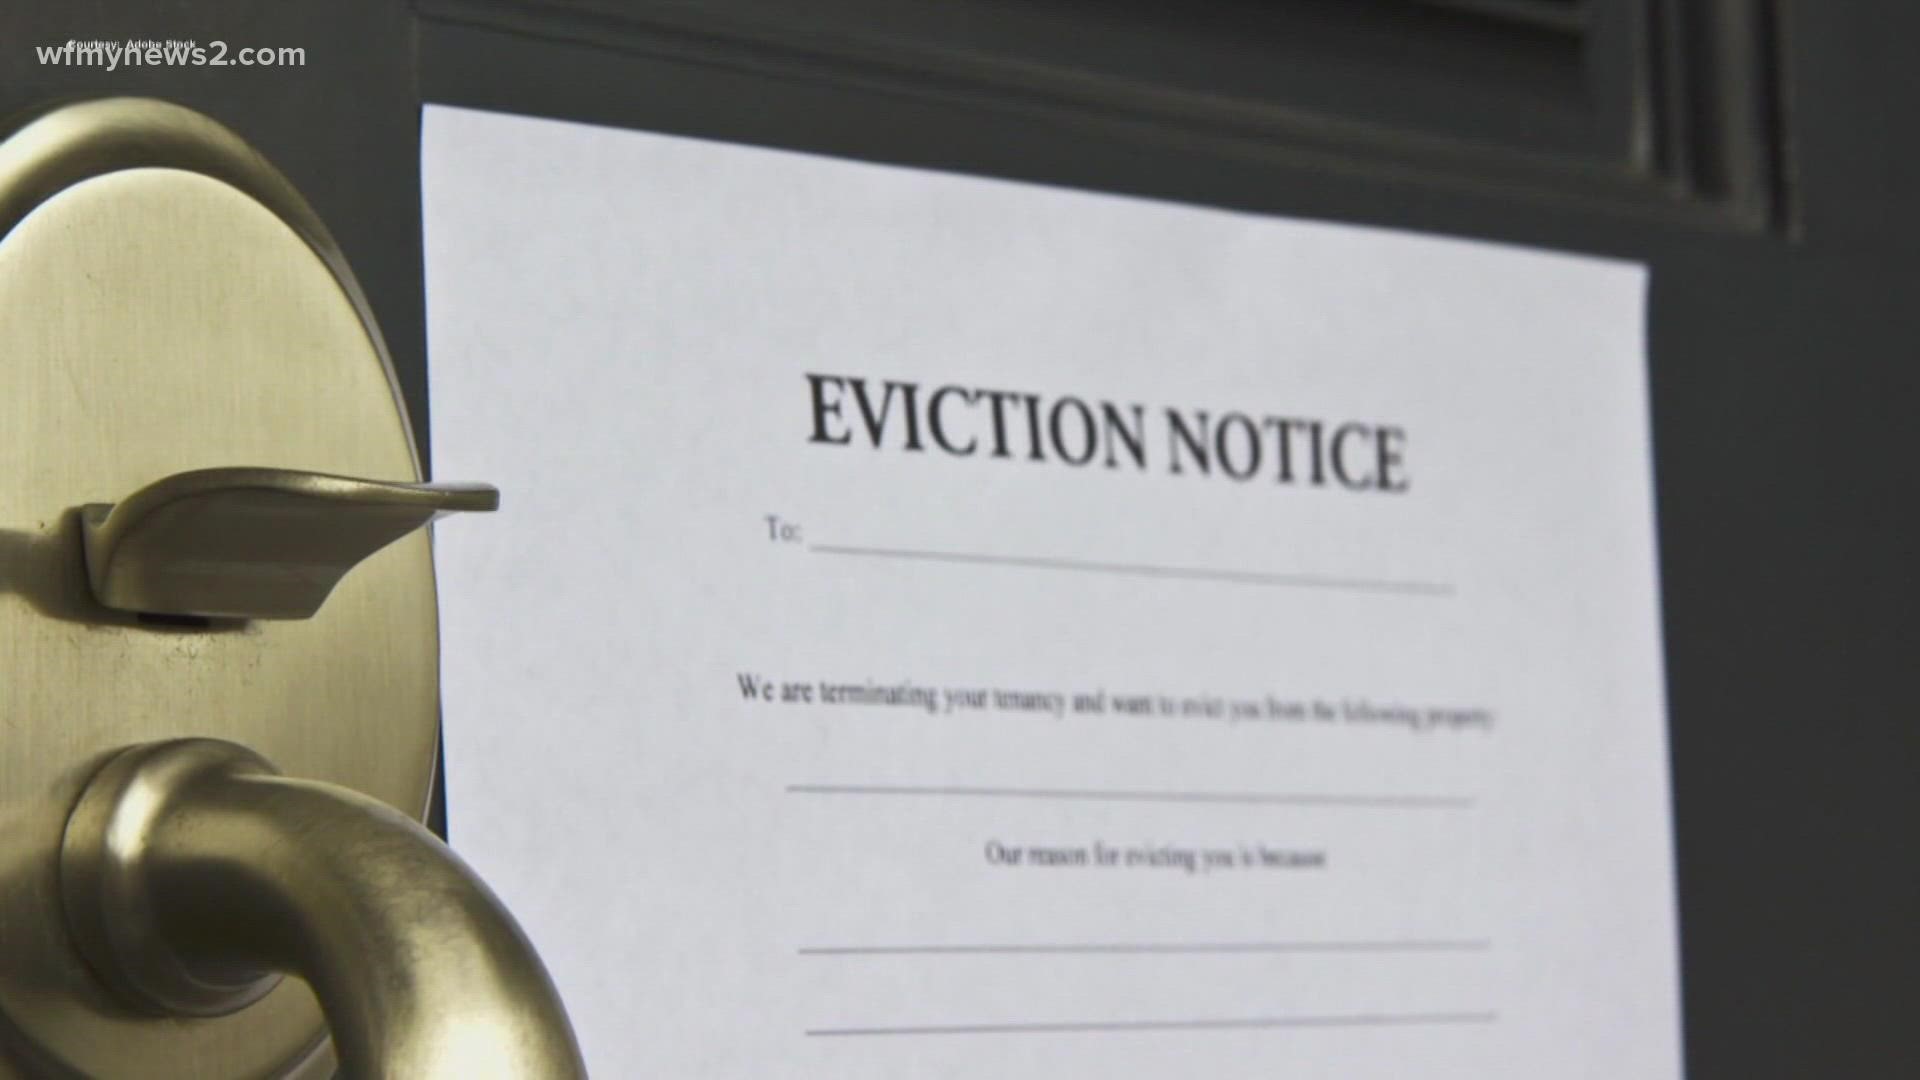 Many renters and landlords are wondering what this means for them moving forward.